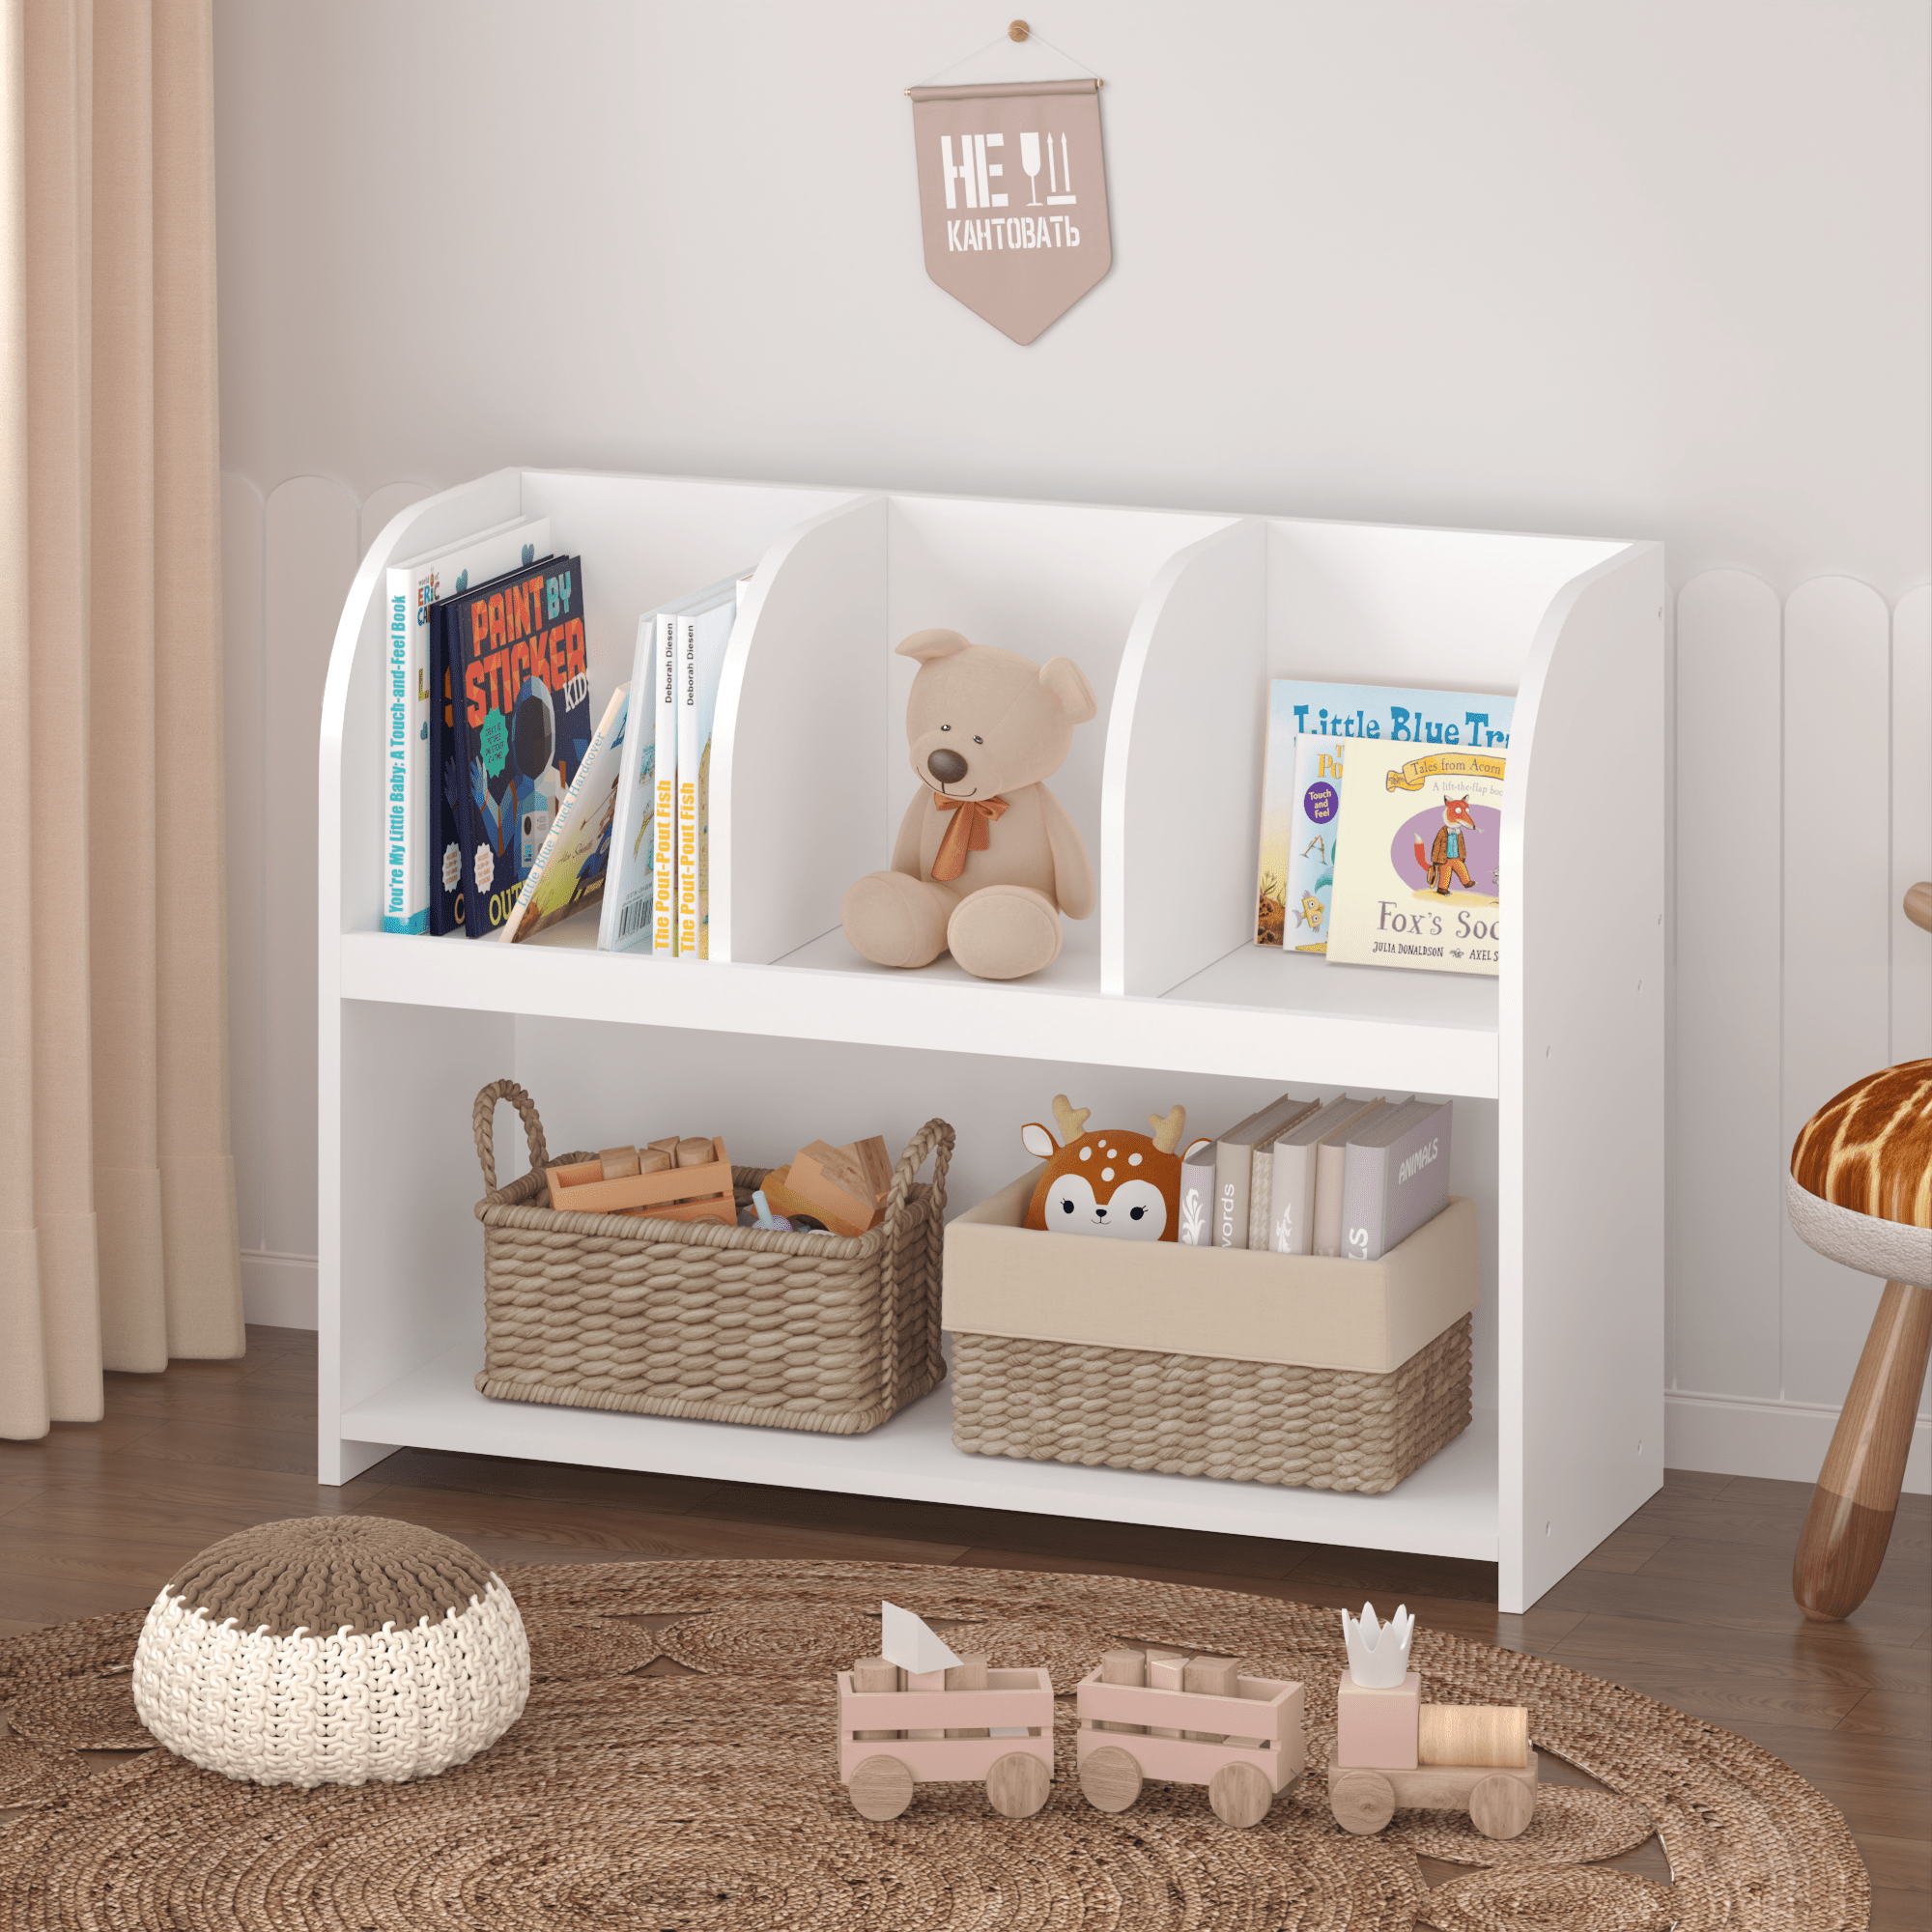 Kids Bookcase with 4 Compartments, Storage Book Shelf, Storage Display, Rack,Toy Organizer for Children's Room, Playroom, Nursery